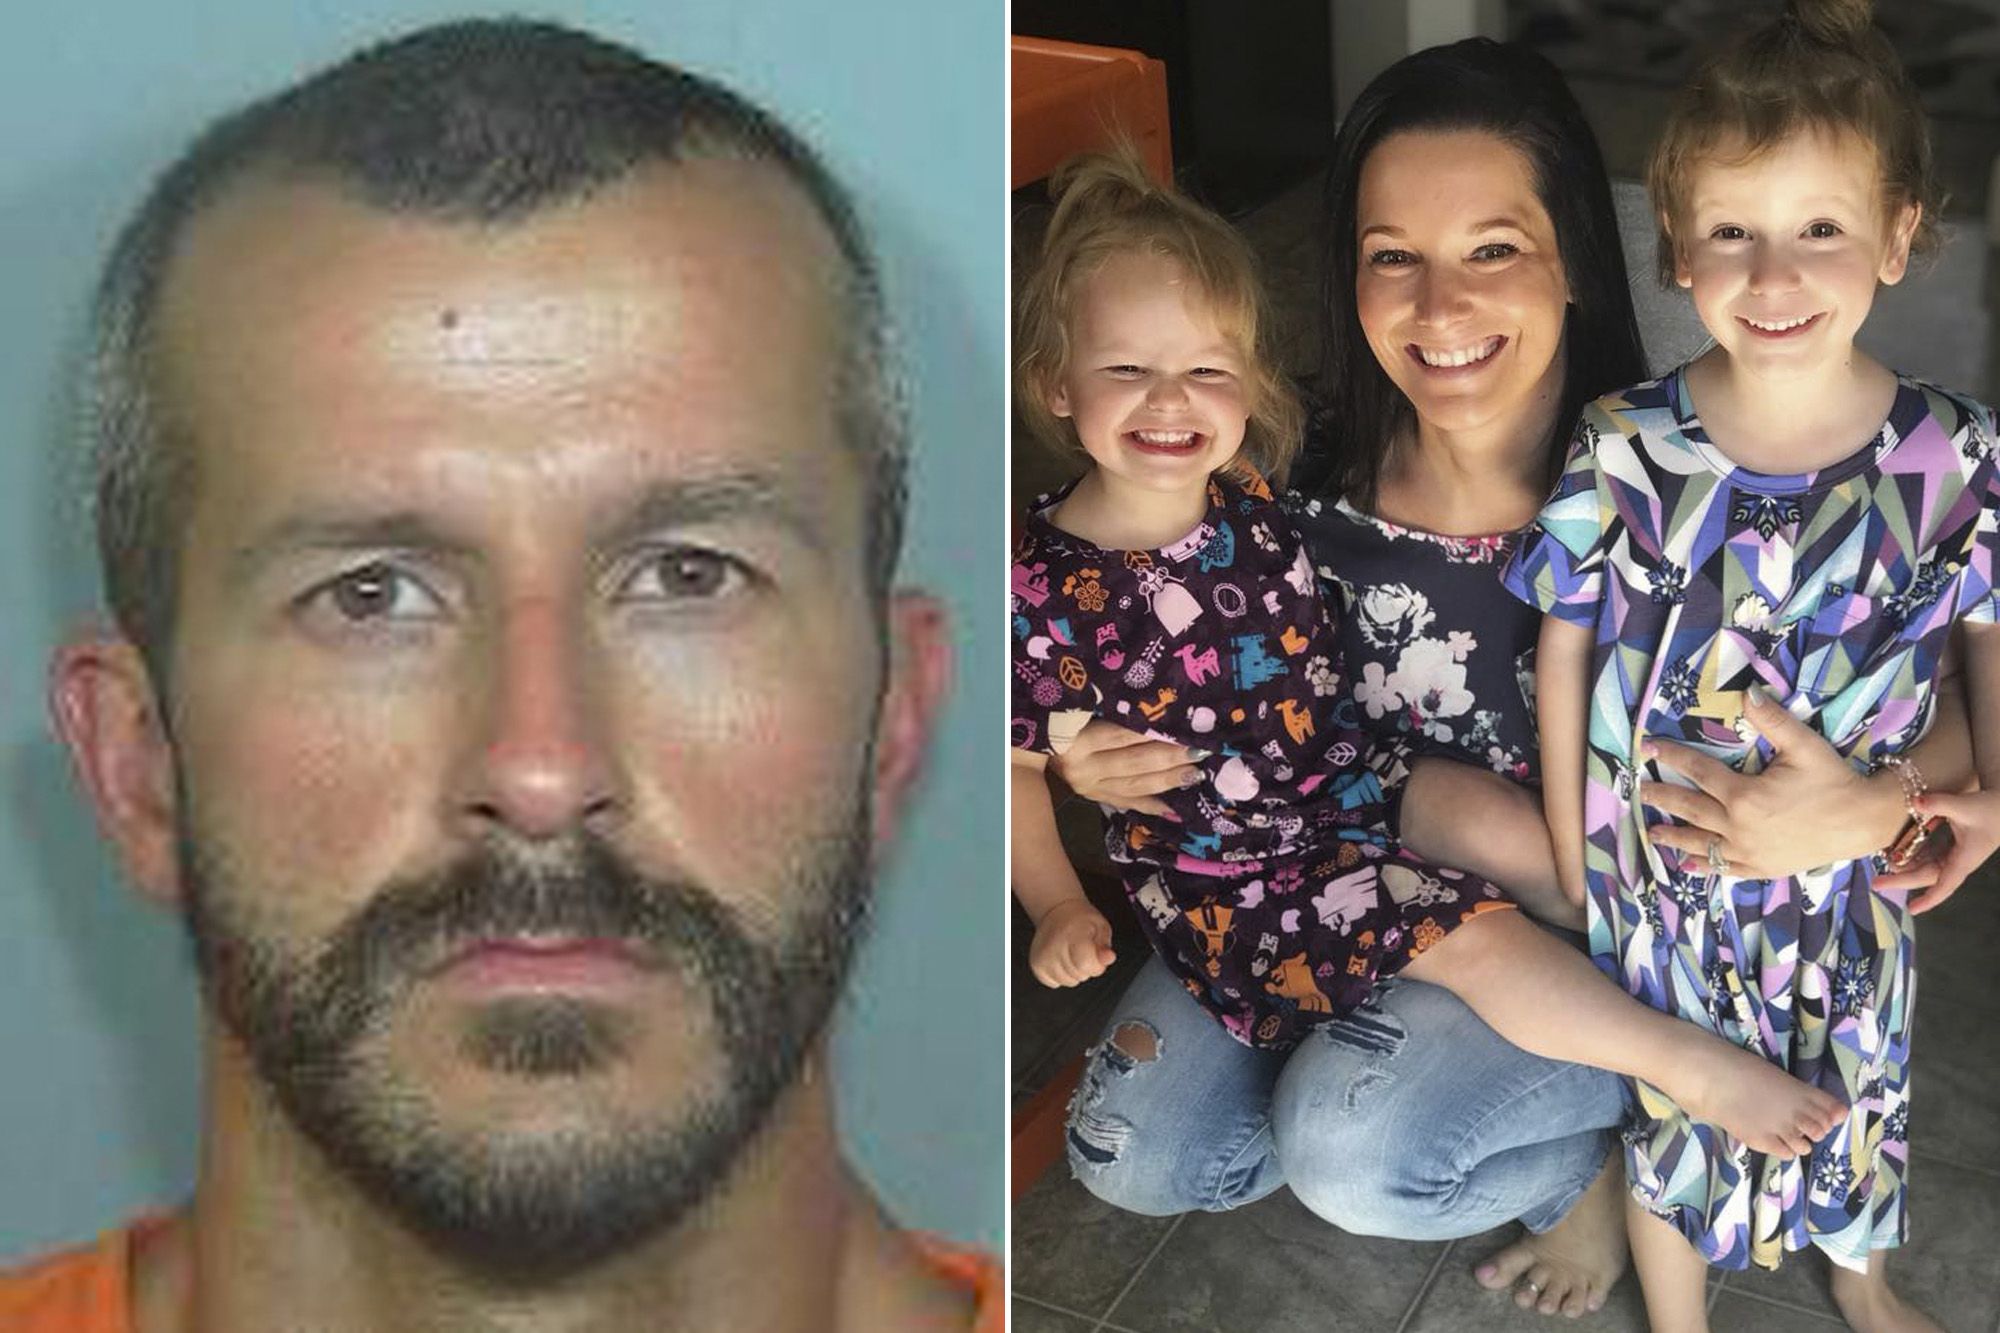 What drove Chris Watts to murder? Every documentary on the subject